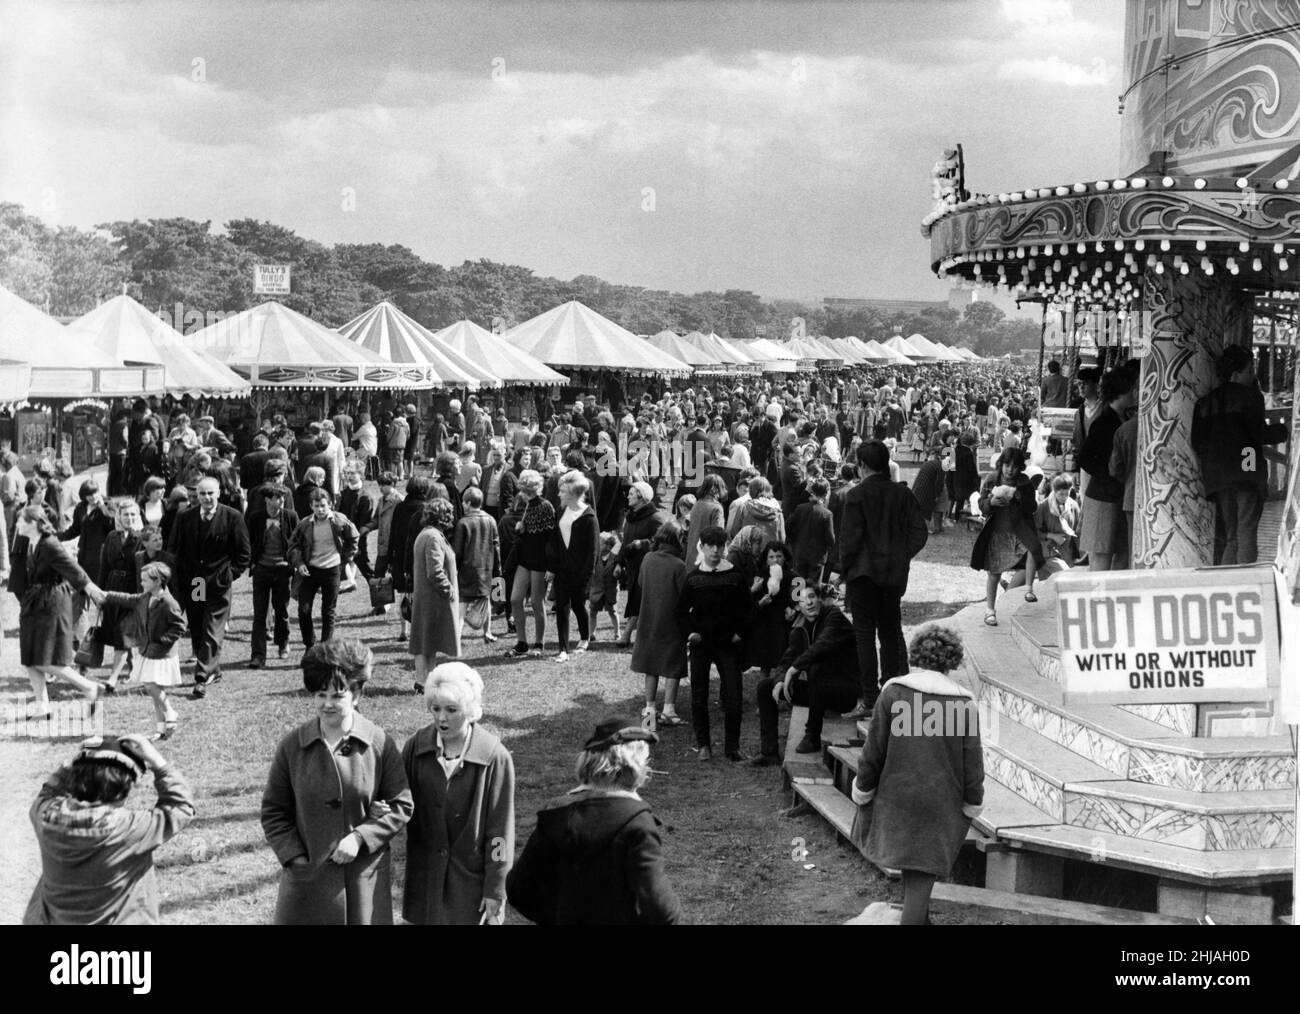 The Hoppings fair, held on the Town Moor in Newcastle upon Tyne, Tyne and Wear. Crowds pictured on the first day of this year's fair. 20th June 1964. Stock Photo